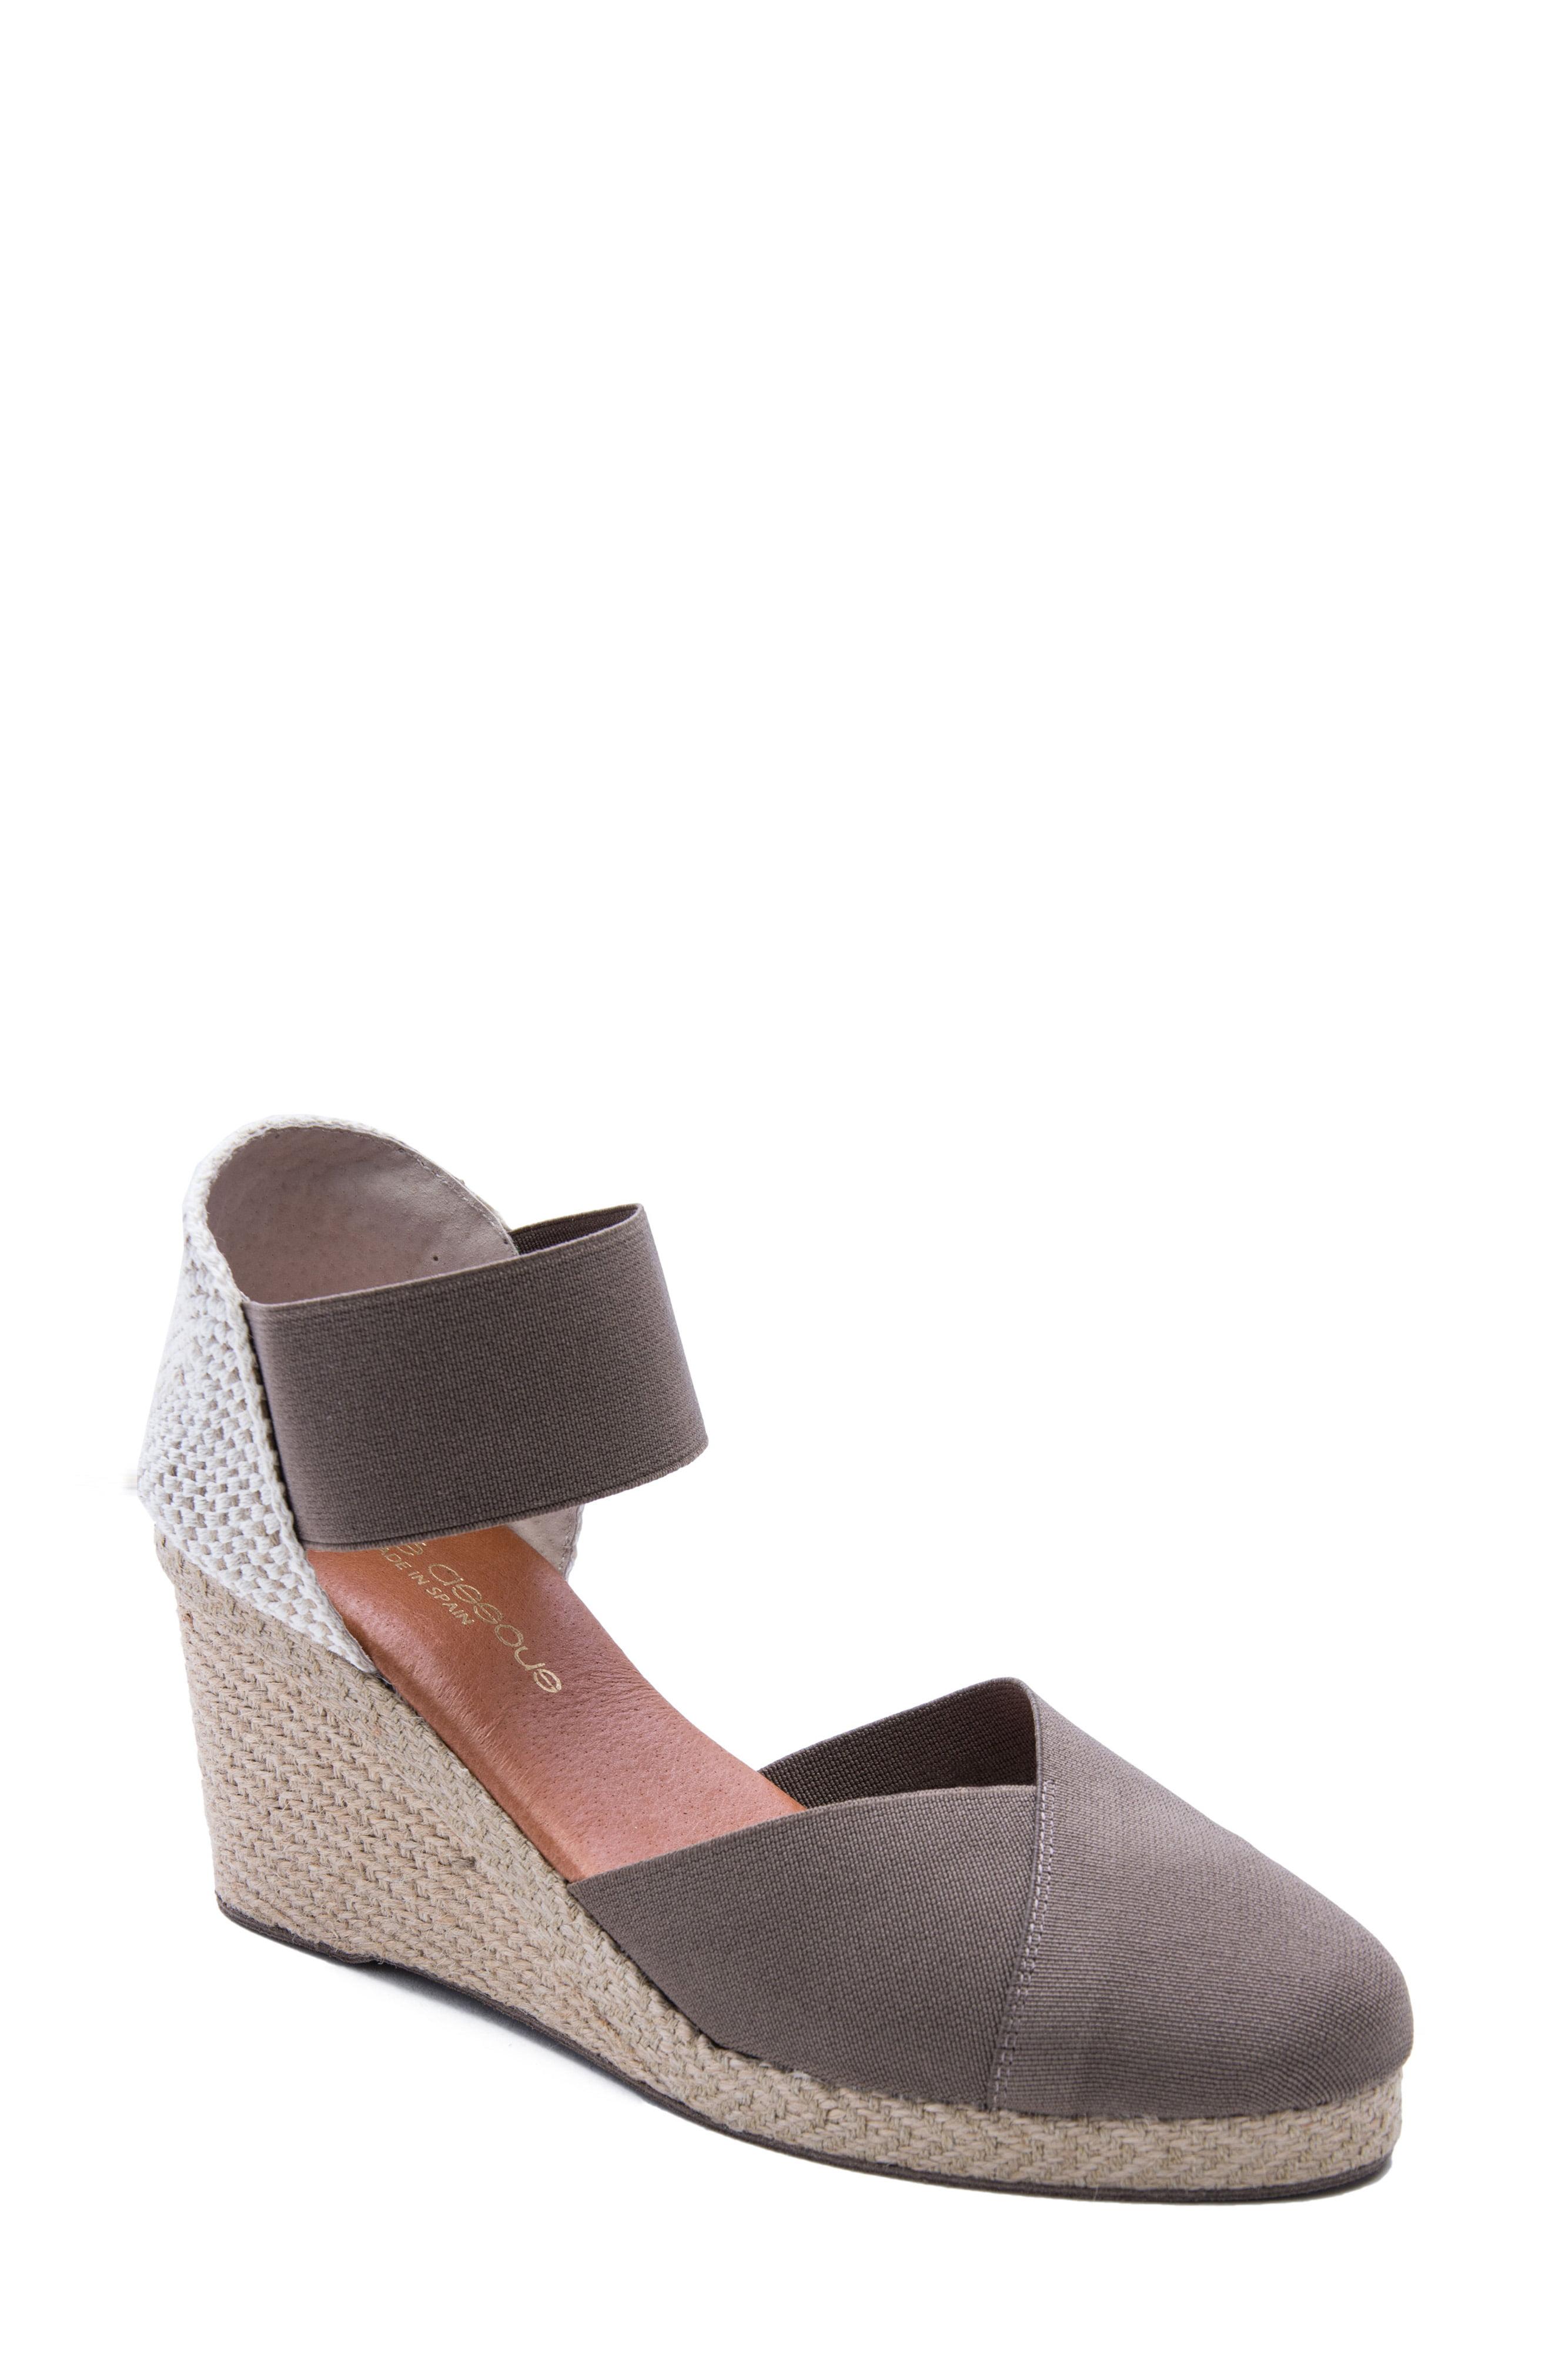 Andre Assous Anouka Espadrille Wedge in Brown - Lyst